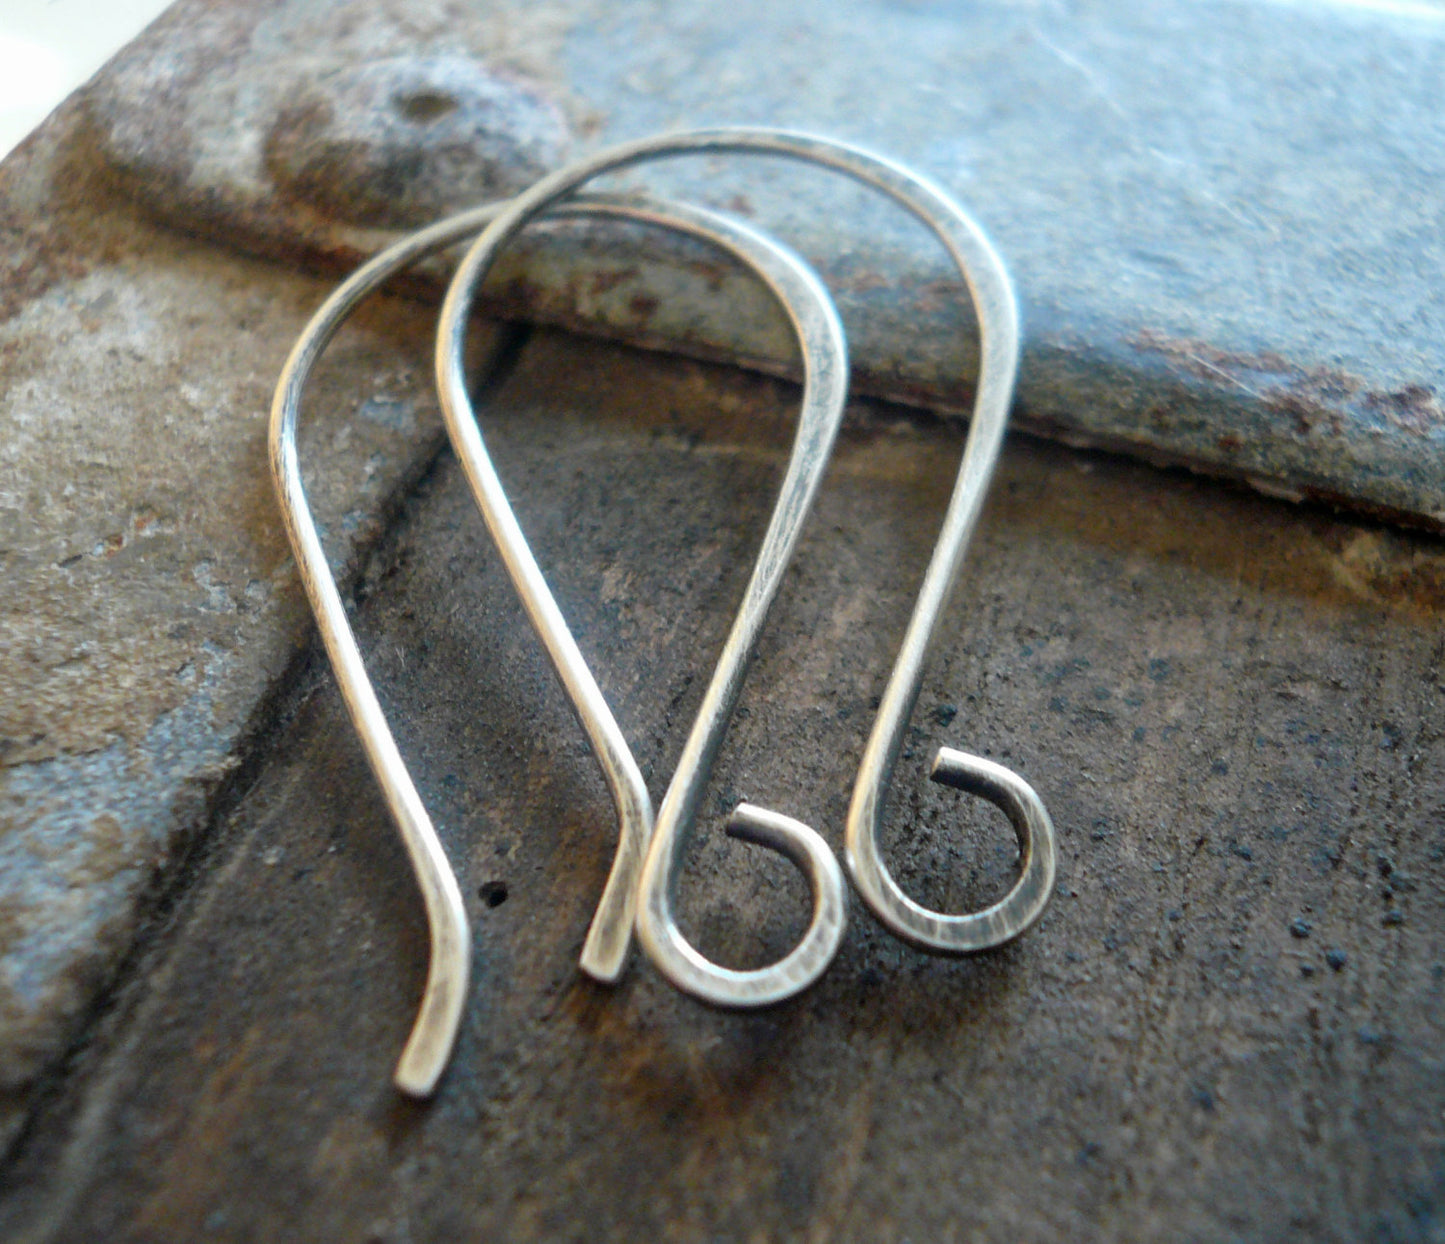 Sway Sterling Silver Earwires - Handmade. Handforged. Oxidized/polished.